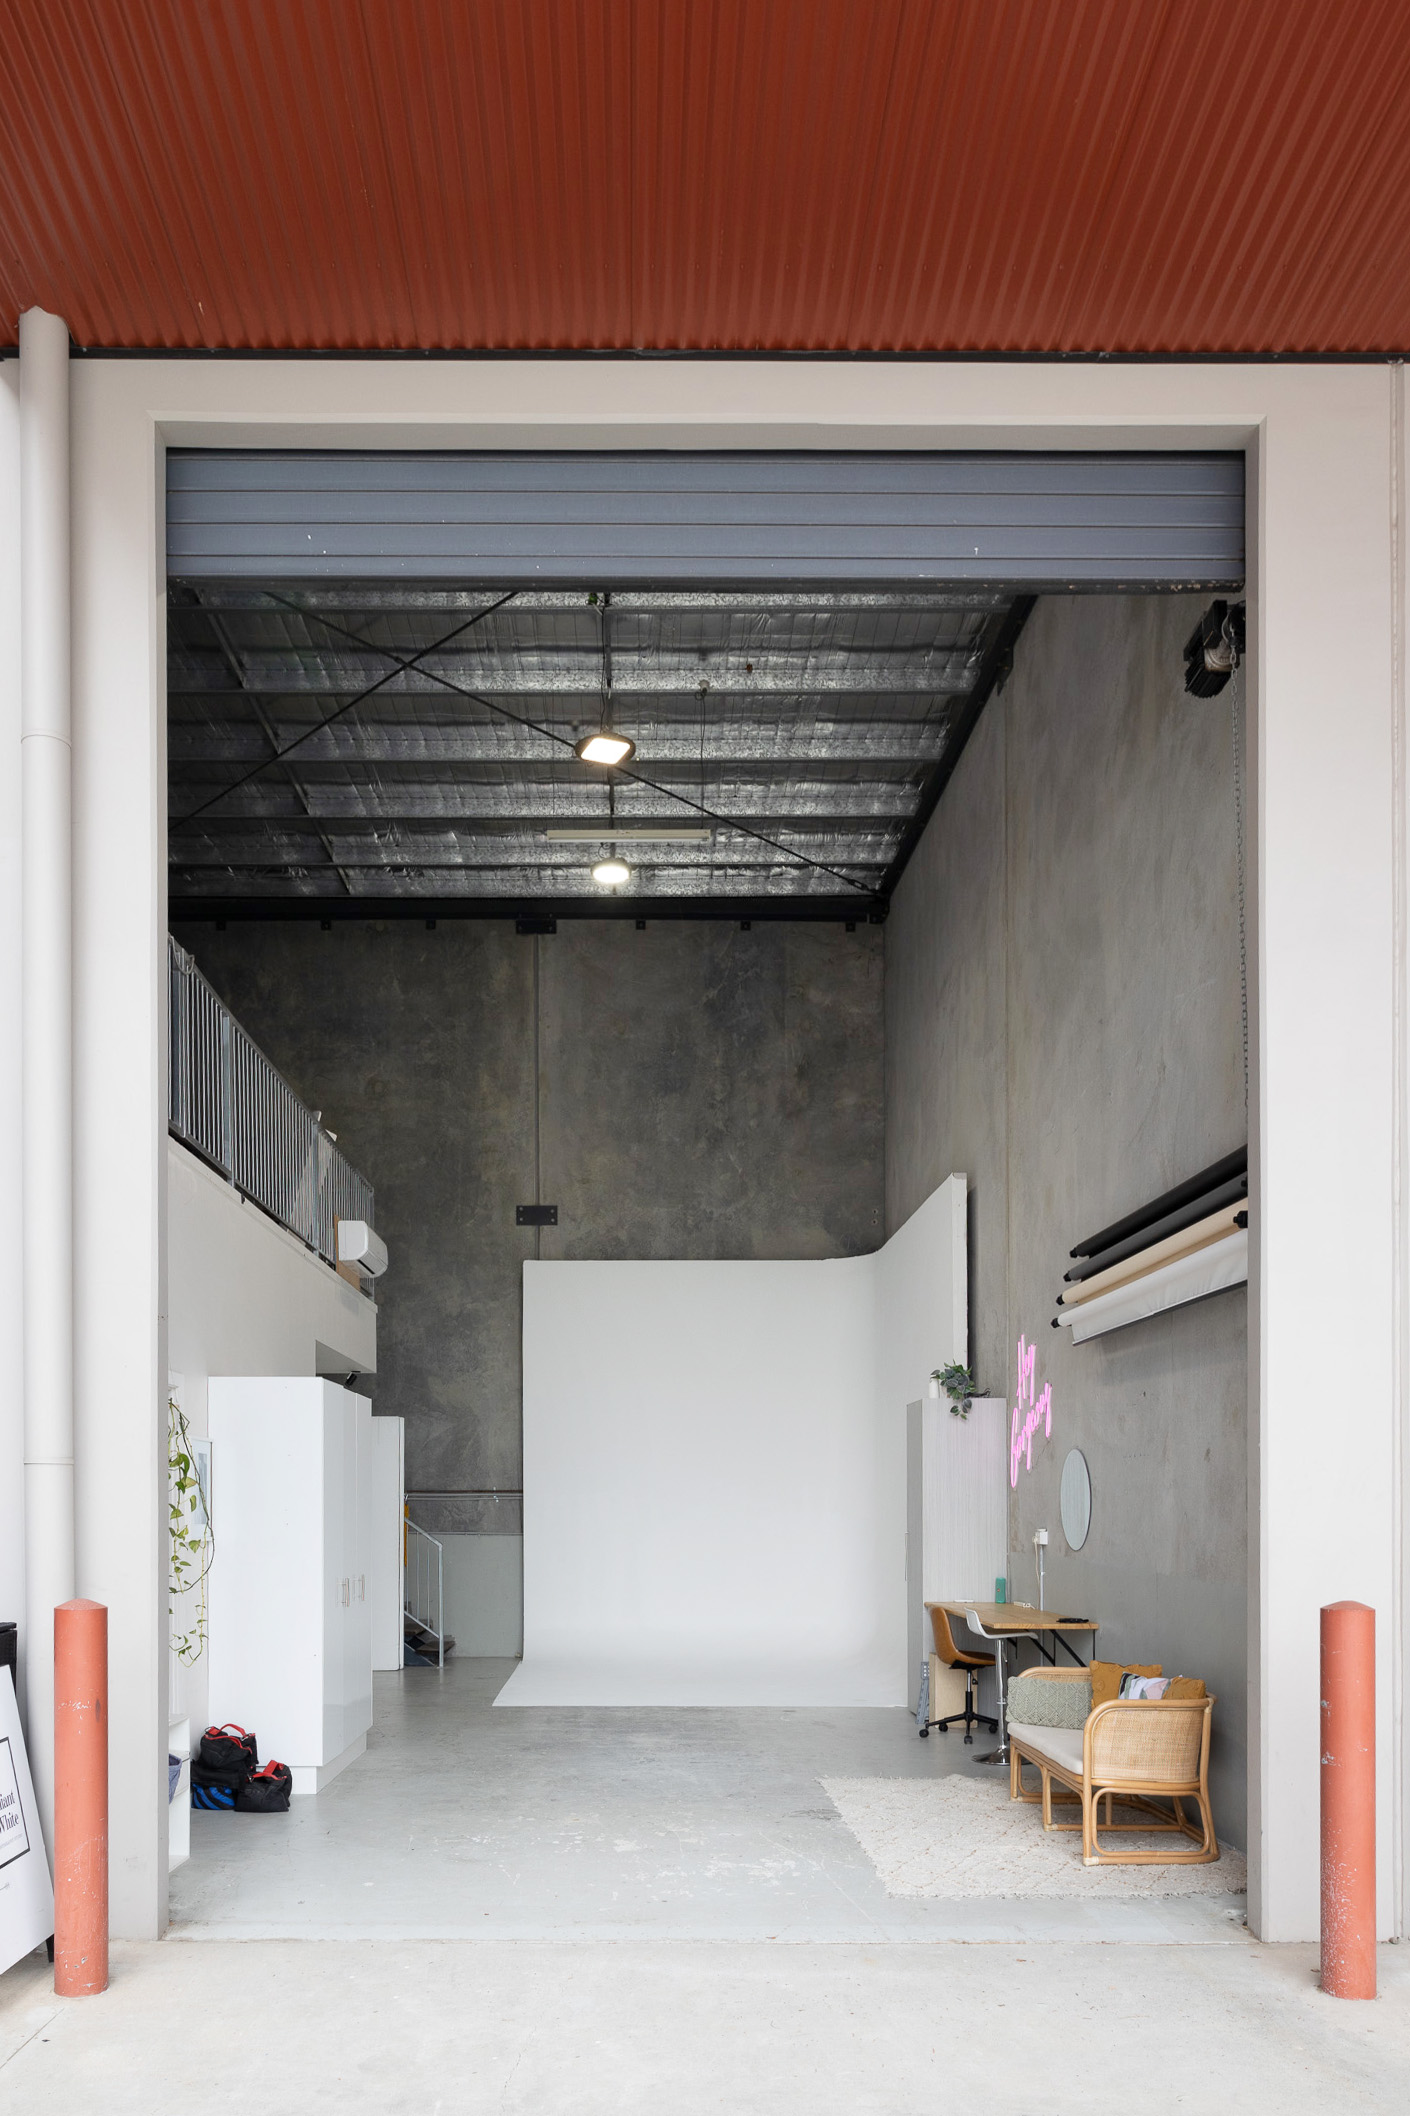 view of brilliant white studio from outside the open double storey roller door showing the cyc and paper backdrops